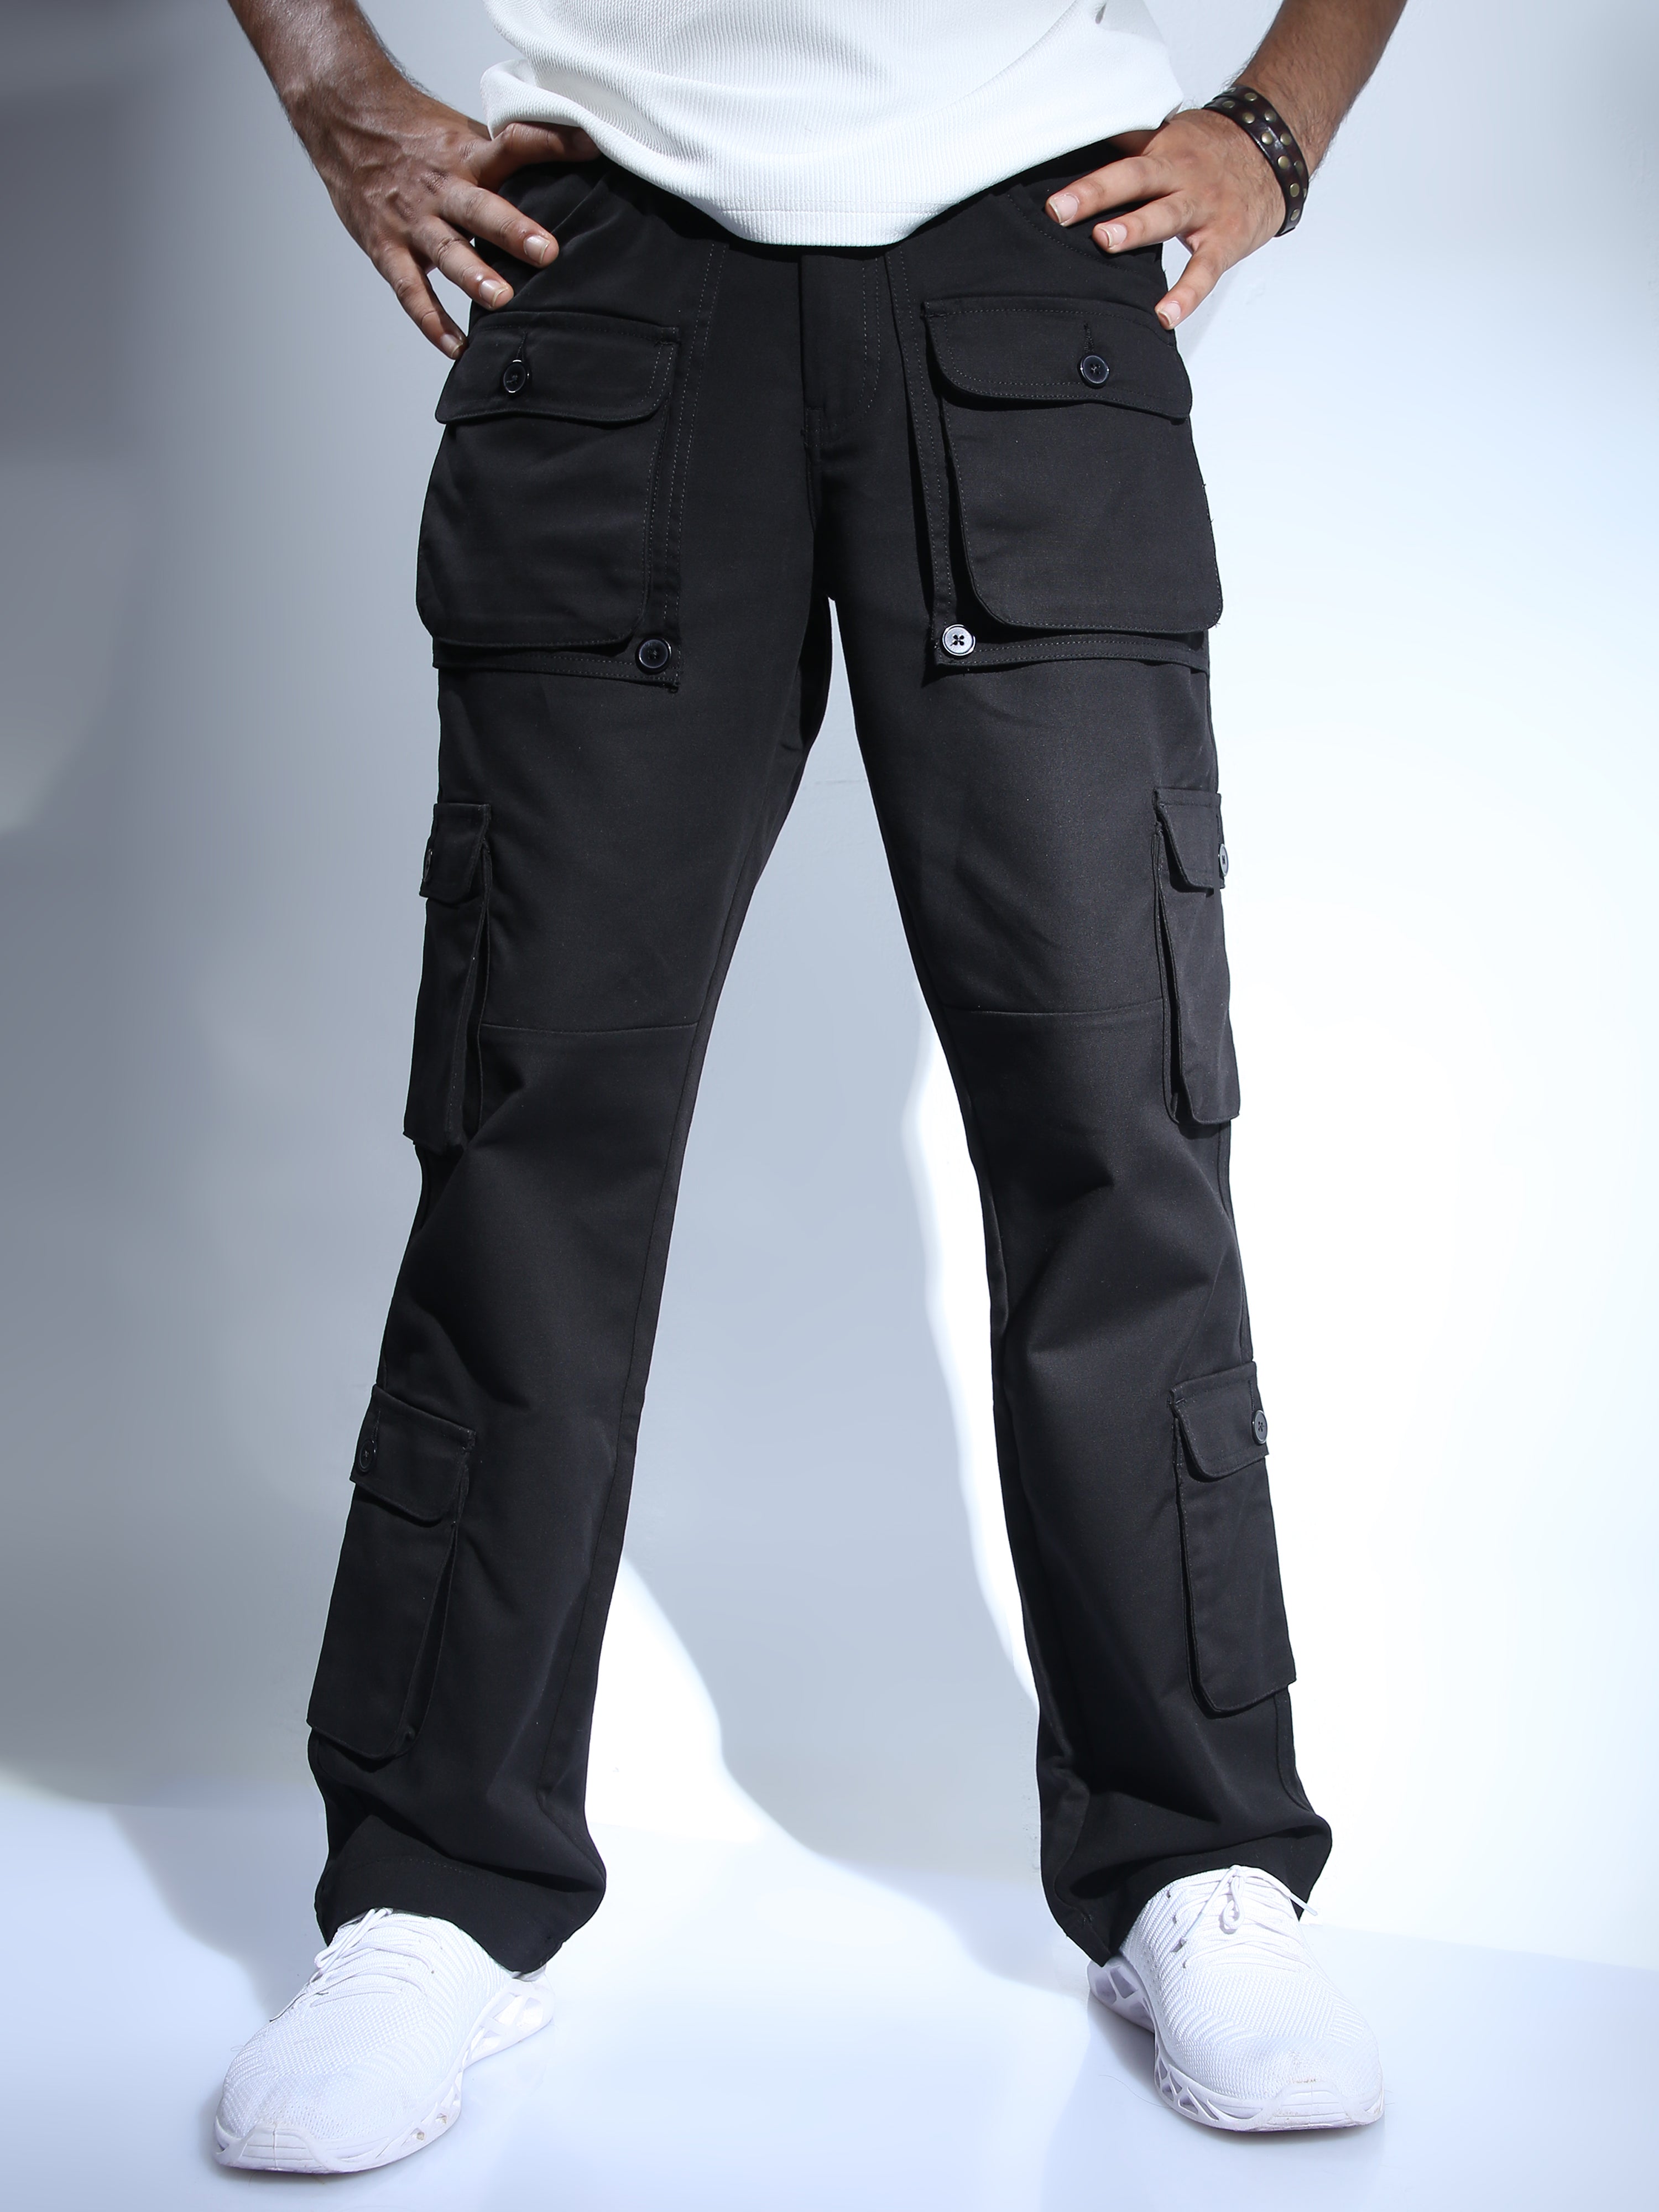 Stretch Trousers - Buy Stretch Trousers online in India